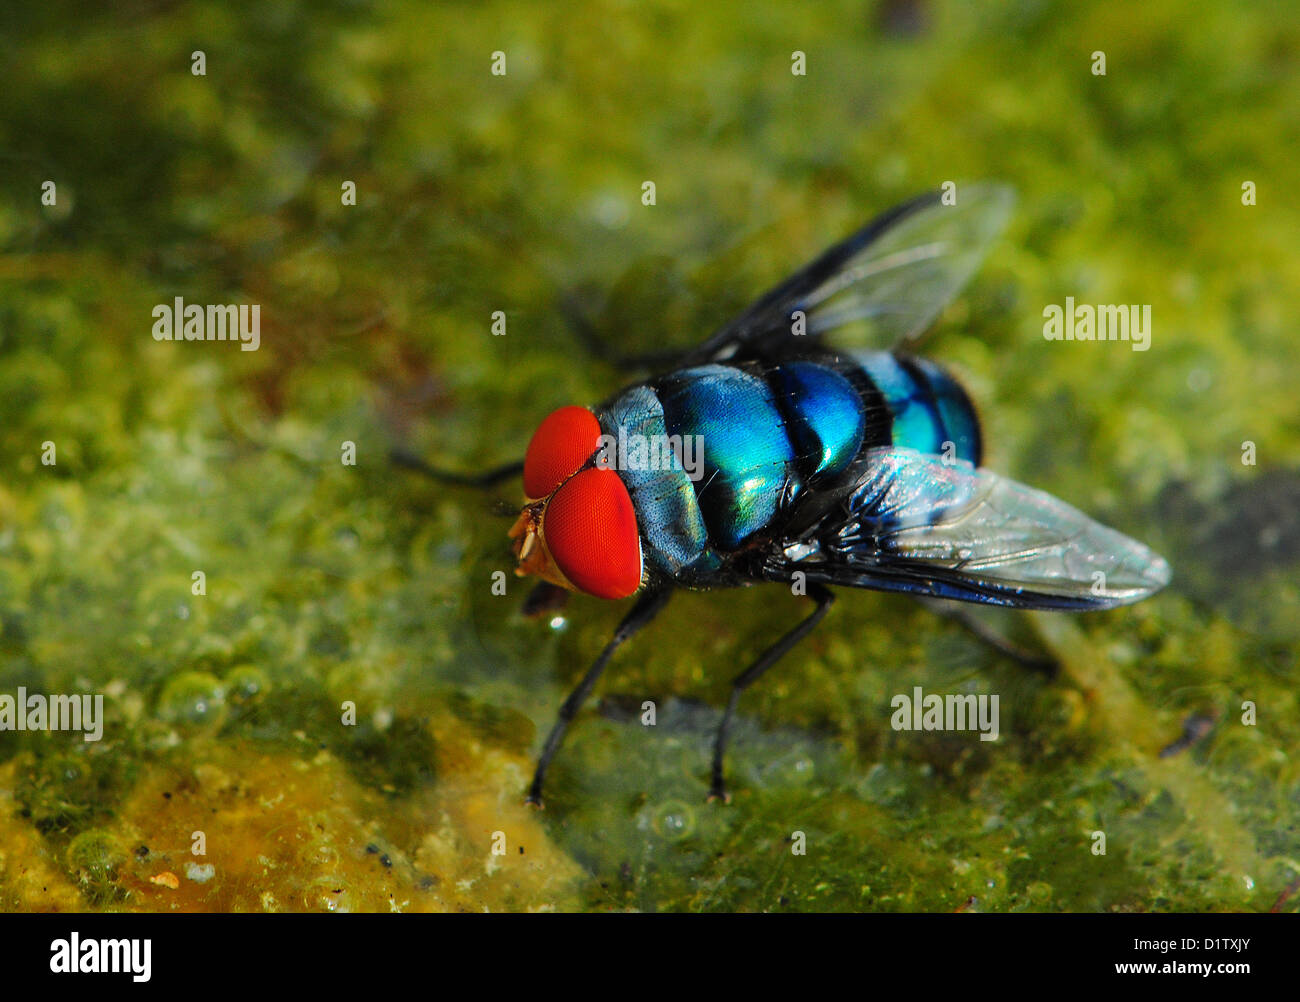 Macro picture of African flowers and insects. Green bottle fly with bright red eyes. Hwange, Zimbabwe. Stock Photo